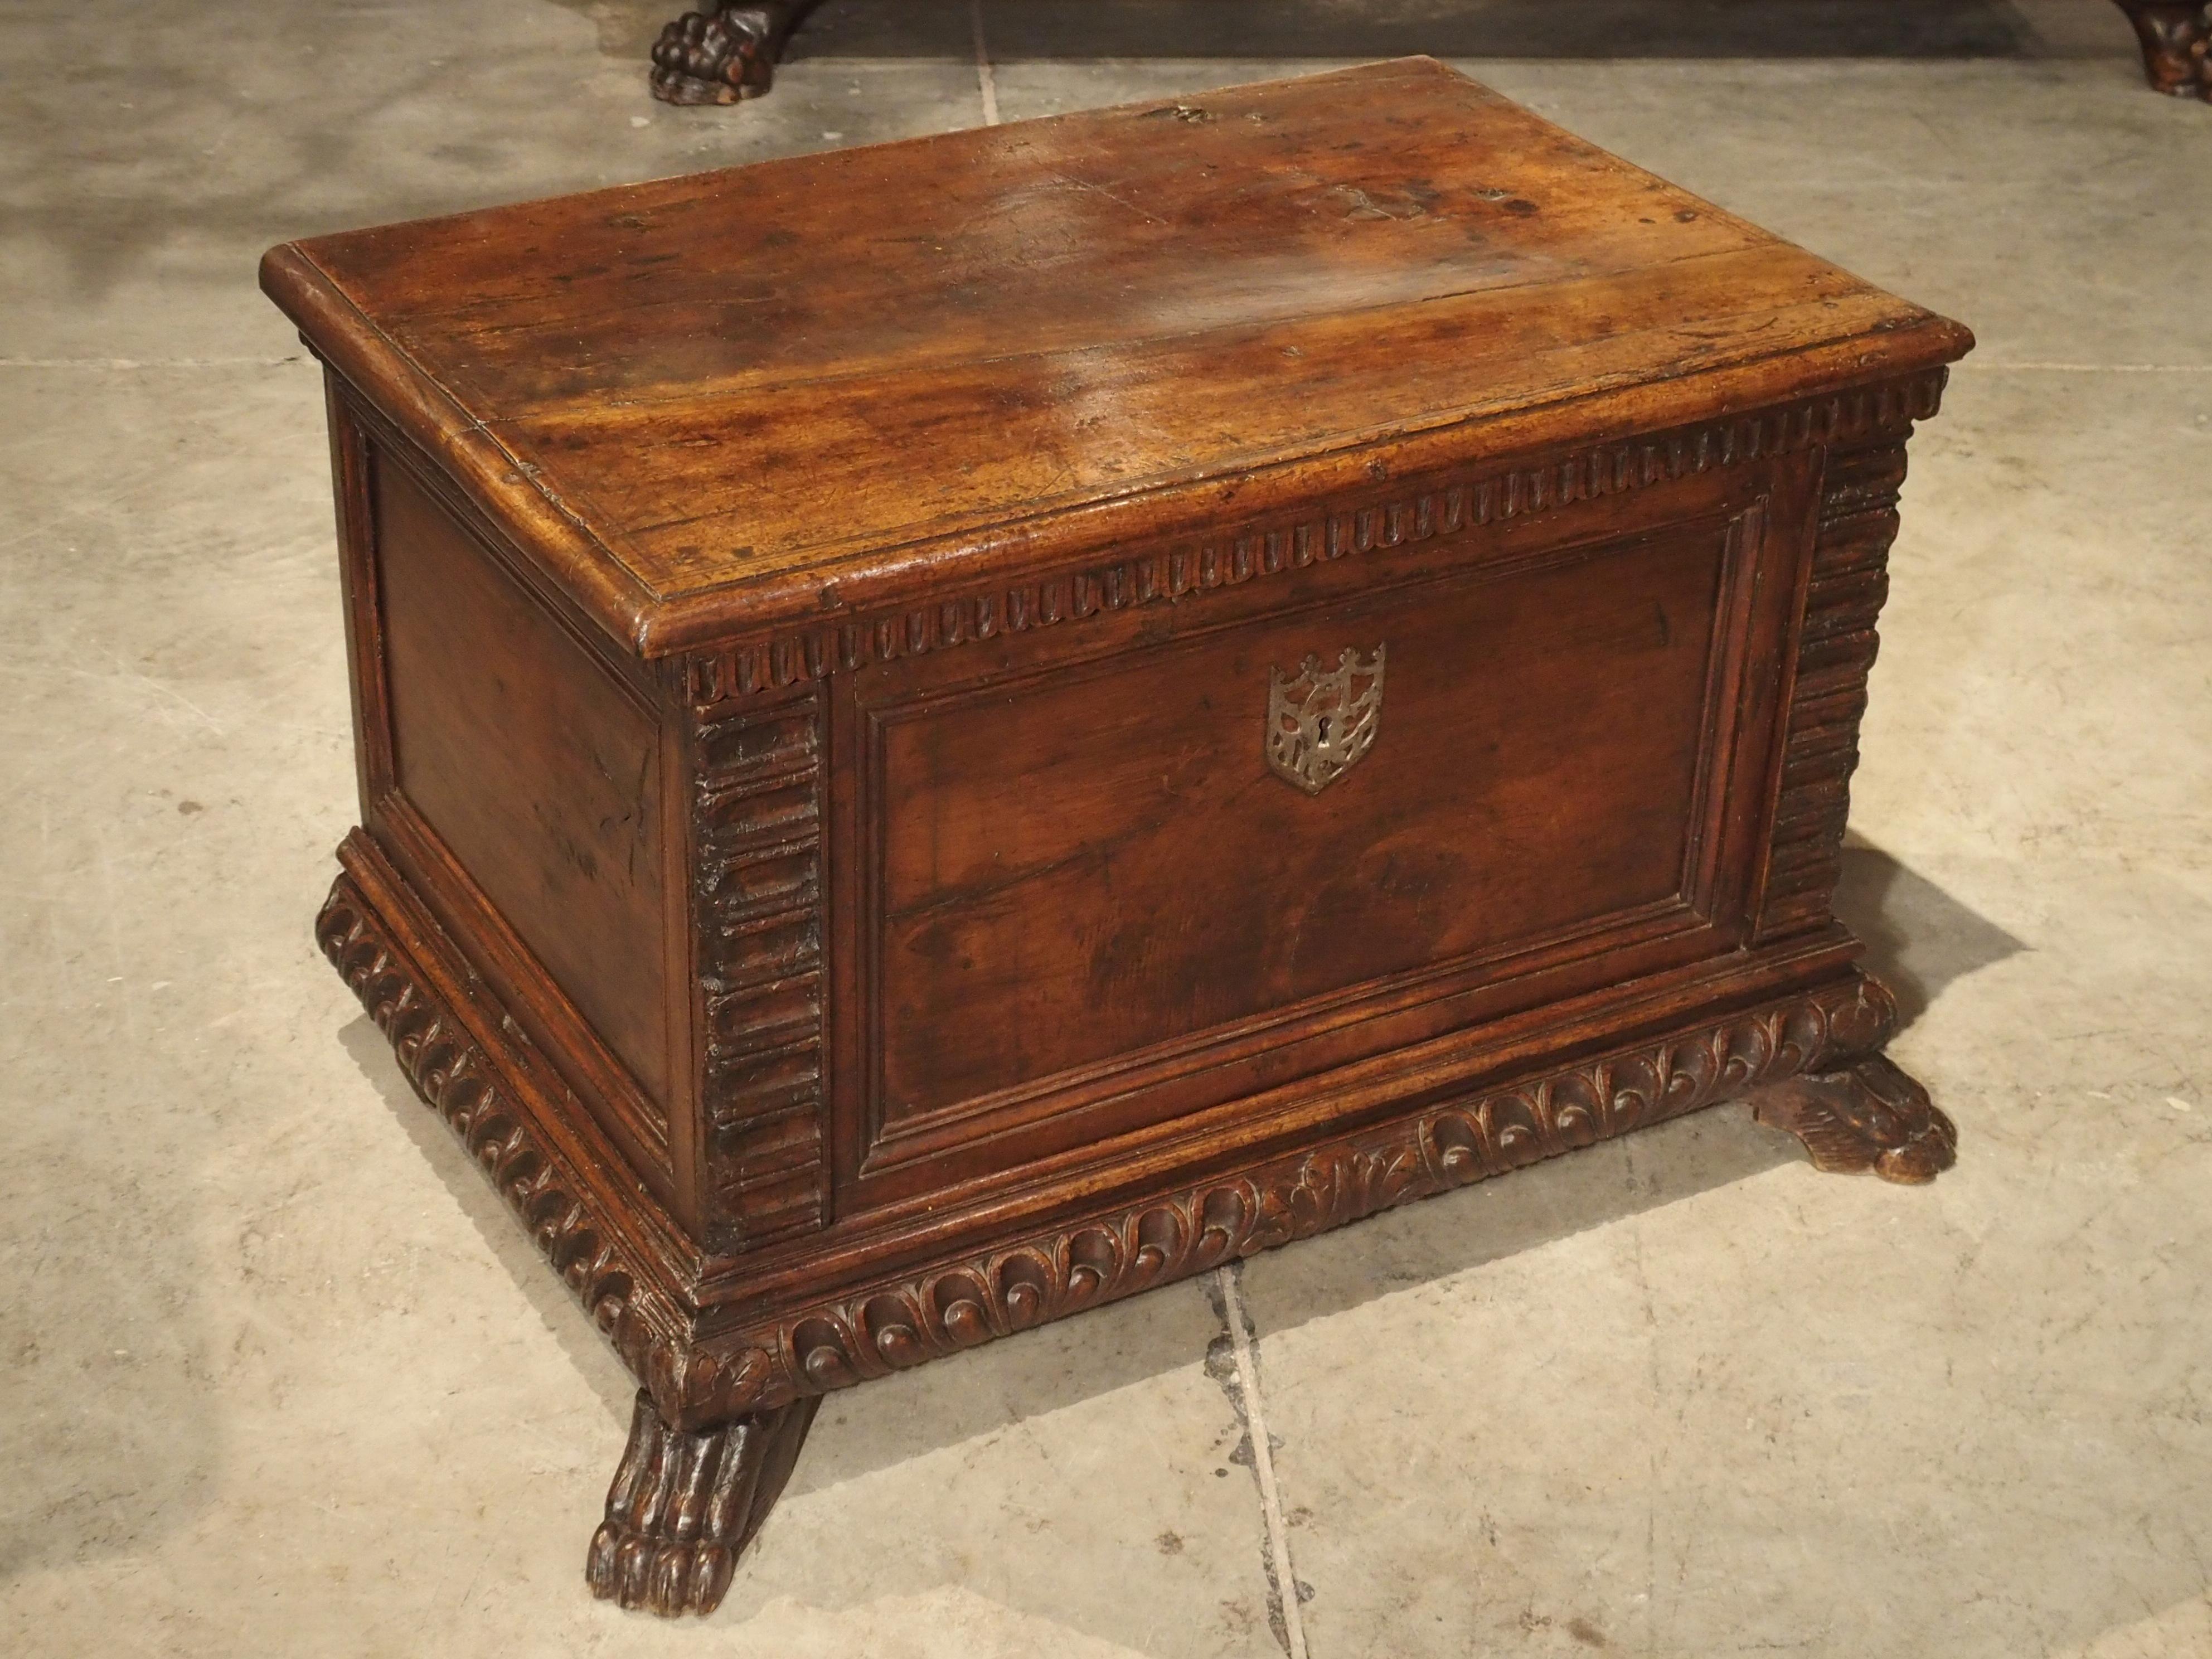 This small walnut wood trunk from Italy is largely made with elements dating to the 1600s. The top, front and sides have plain panels outlined with moldings. The decorative motifs are triglyphs, scoops, gadrooned lobes and acanthus leaves. The feet